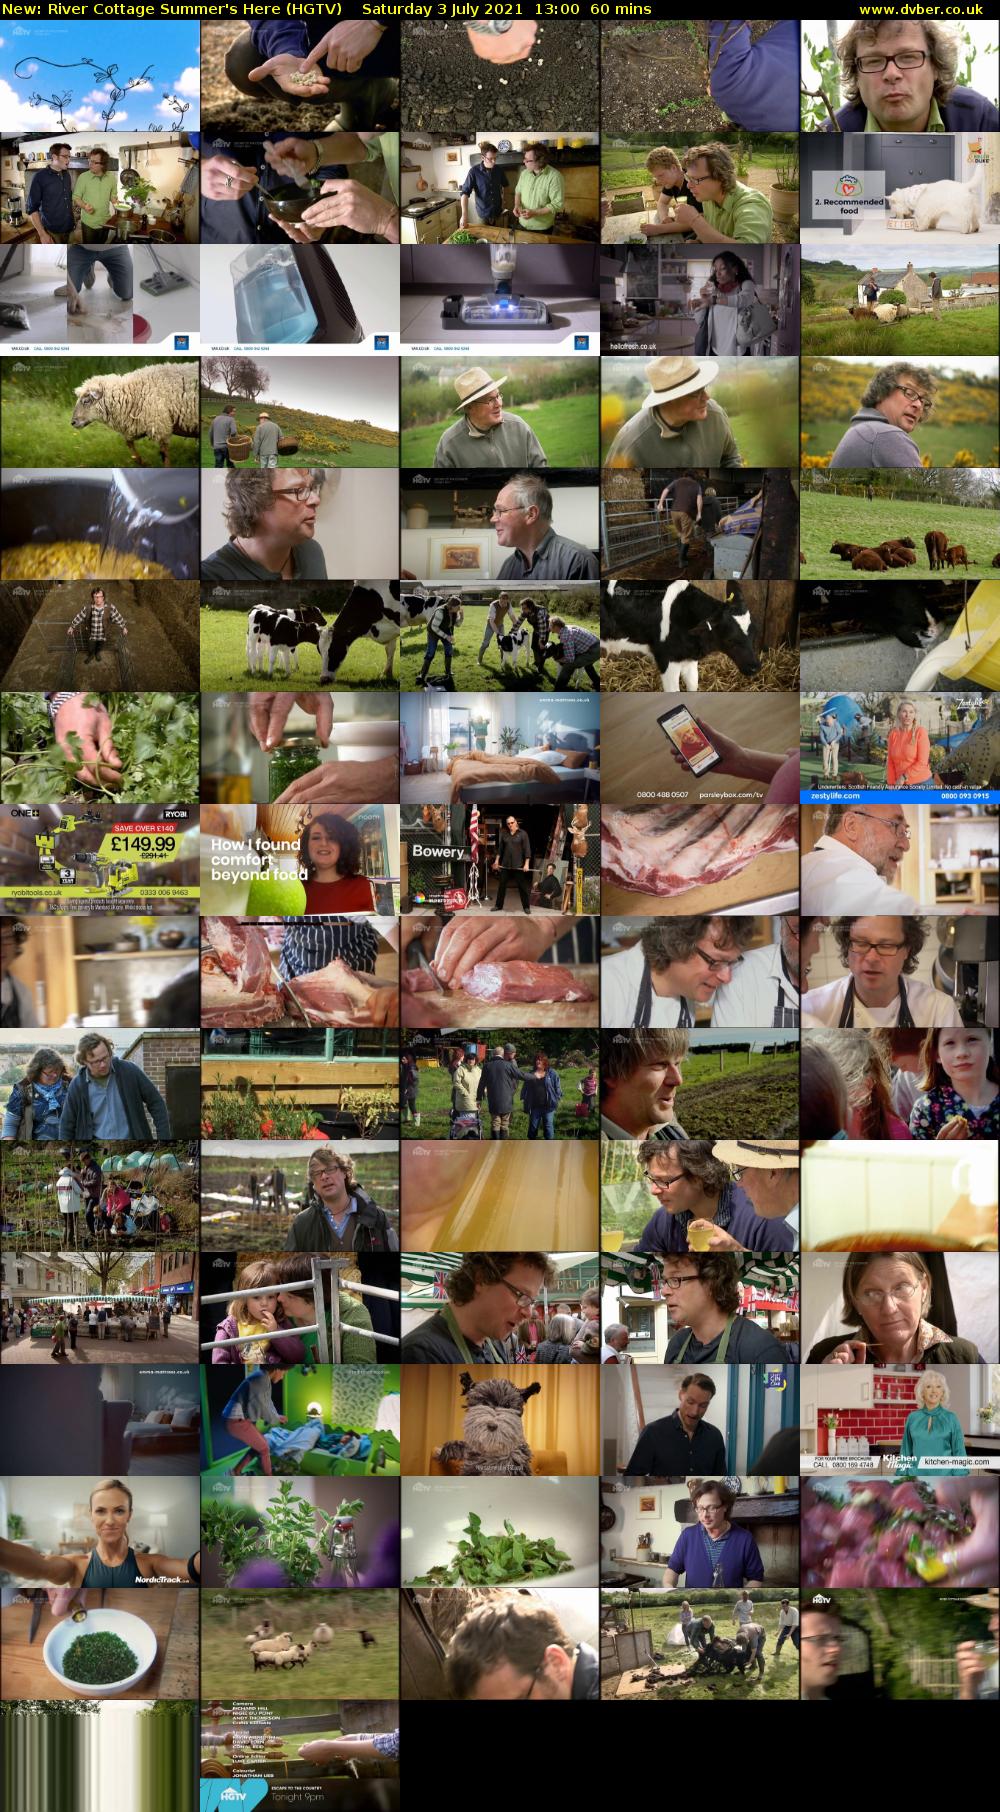 River Cottage Summer's Here (HGTV) Saturday 3 July 2021 13:00 - 14:00